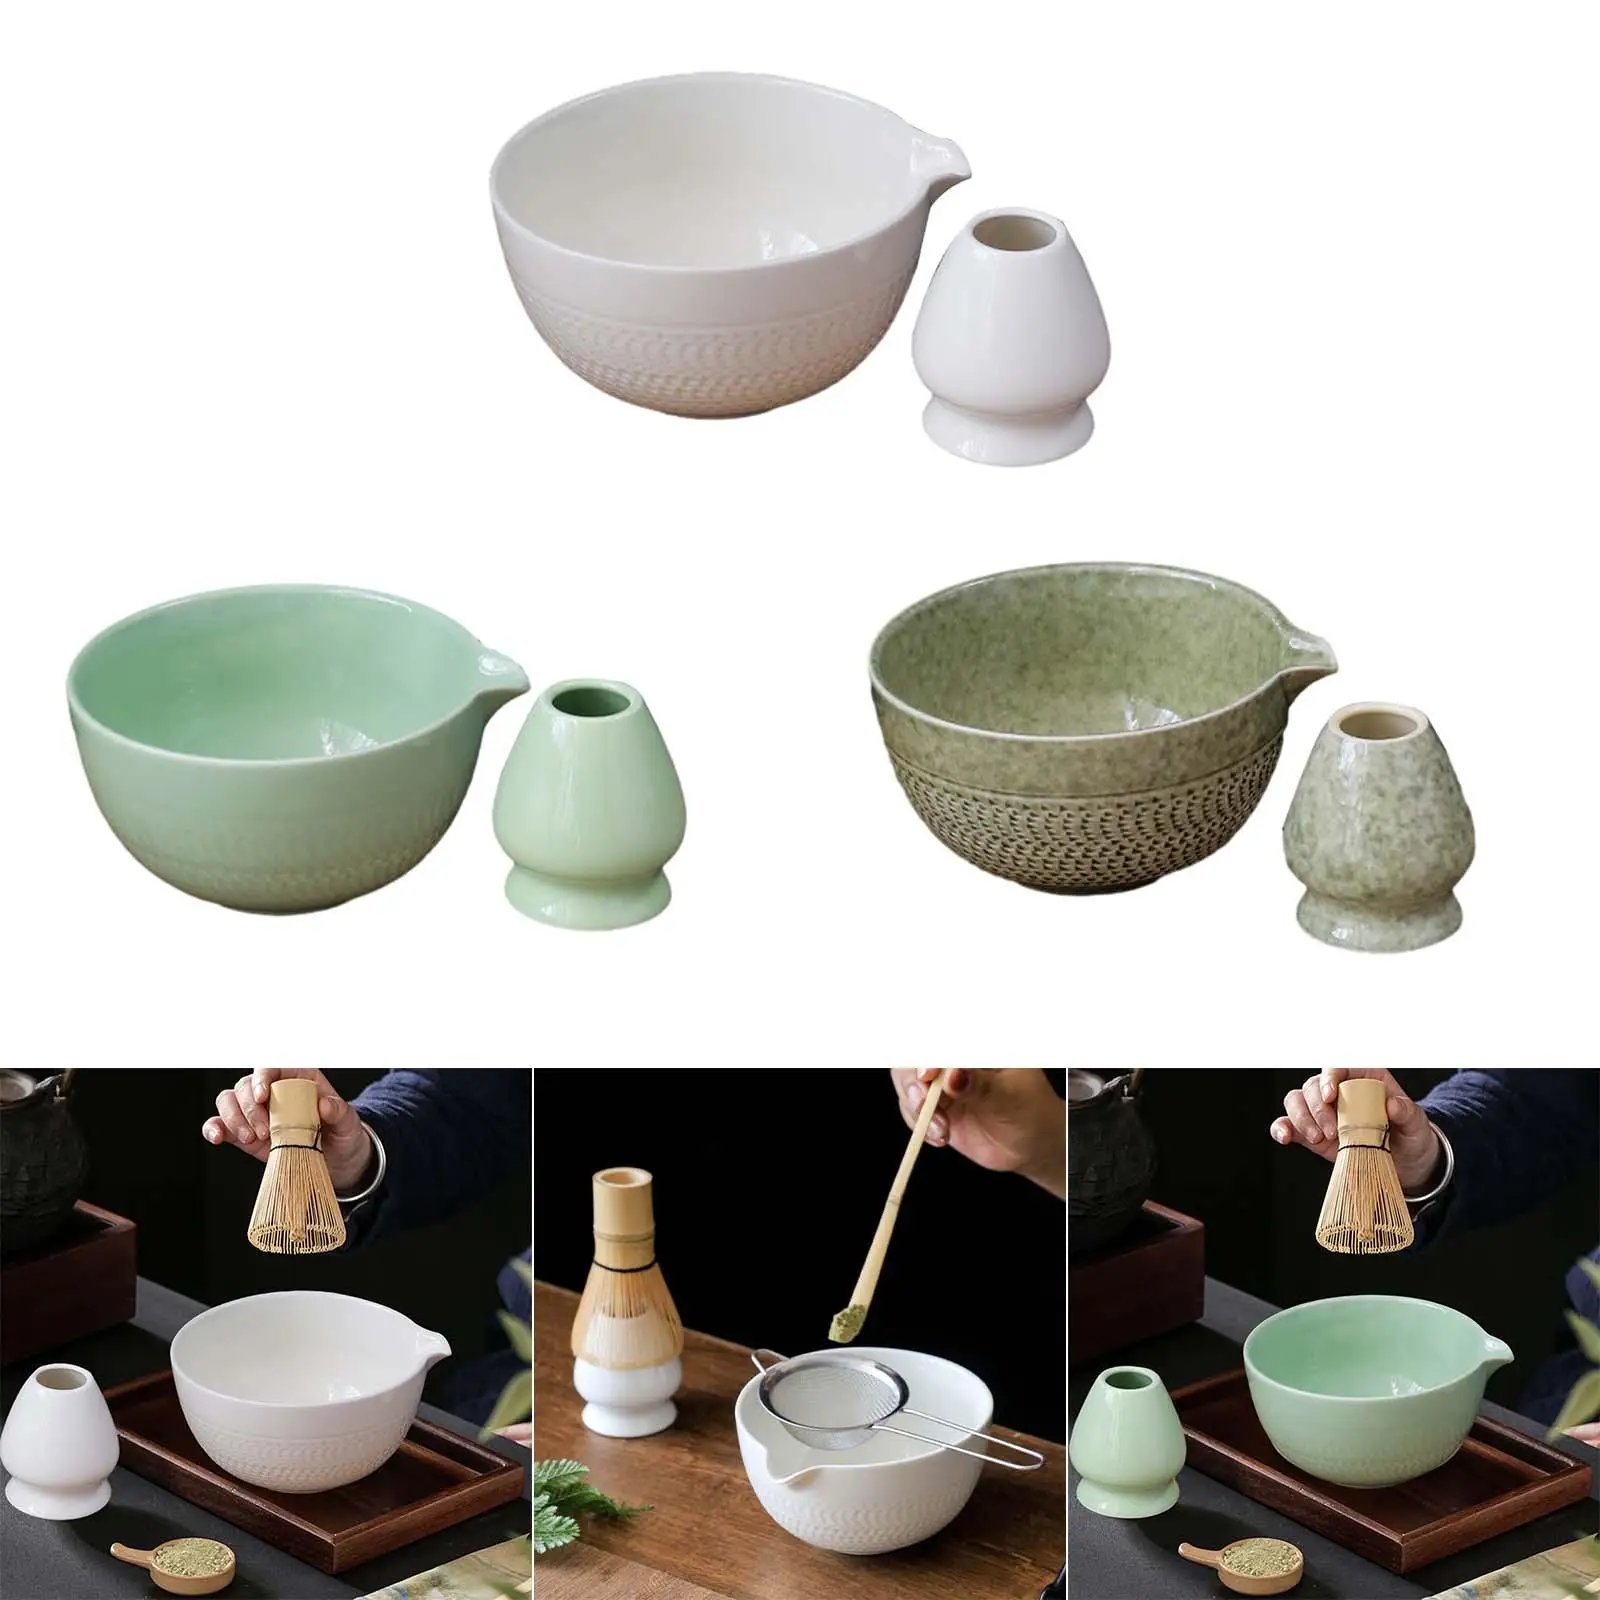 2Pcs Traditional Matcha Bowl with Whisk Holder Handmade Matcha Ceremony for Traditional Ceremonial Home Table Office Bedroom